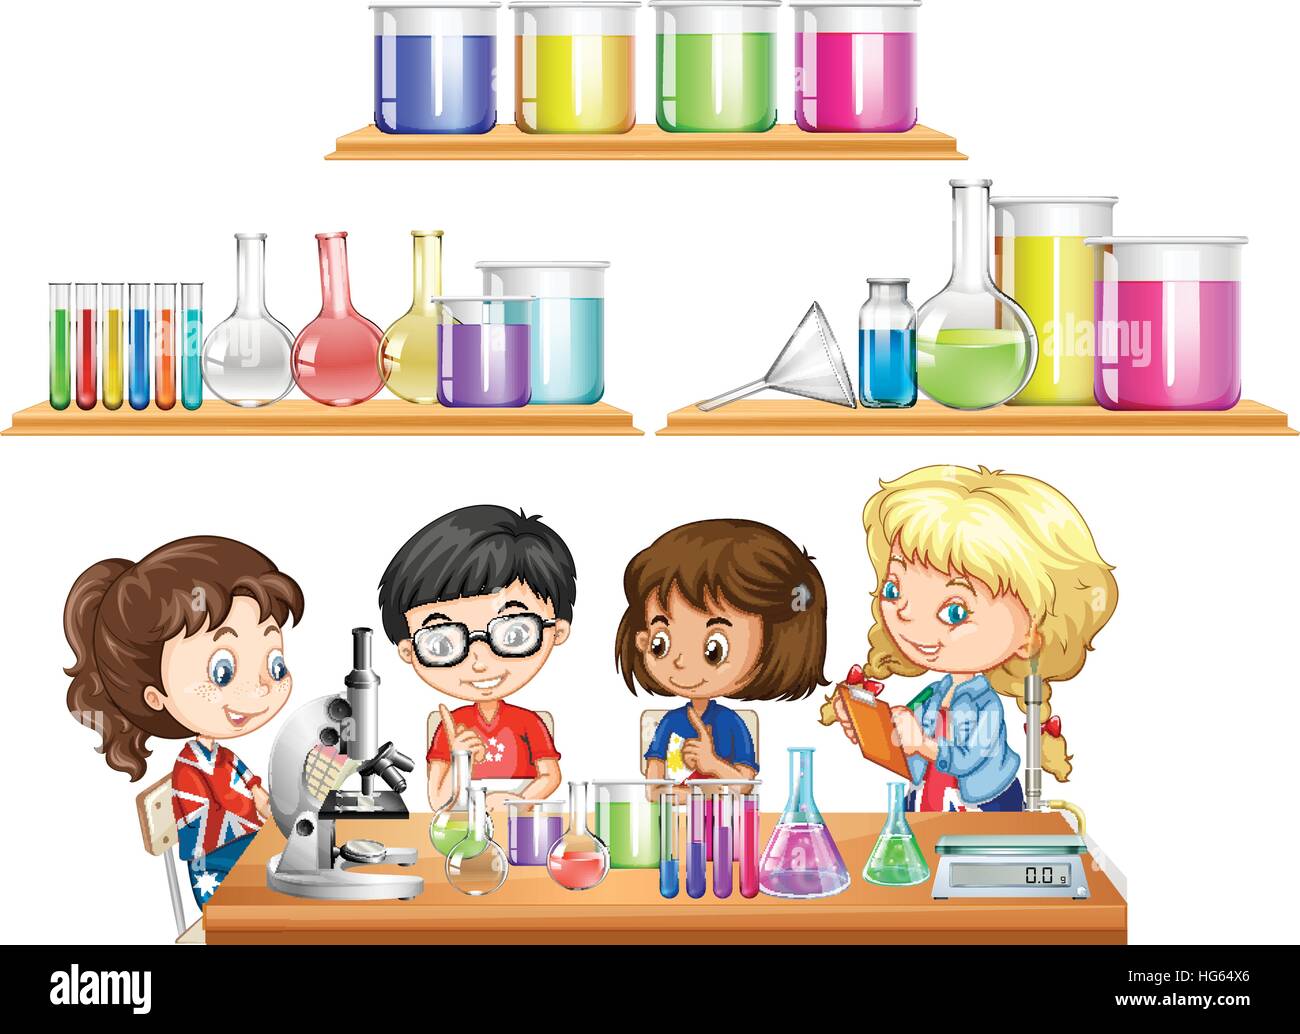 Kids doing science experiment and set of beakers illustration Stock Vector